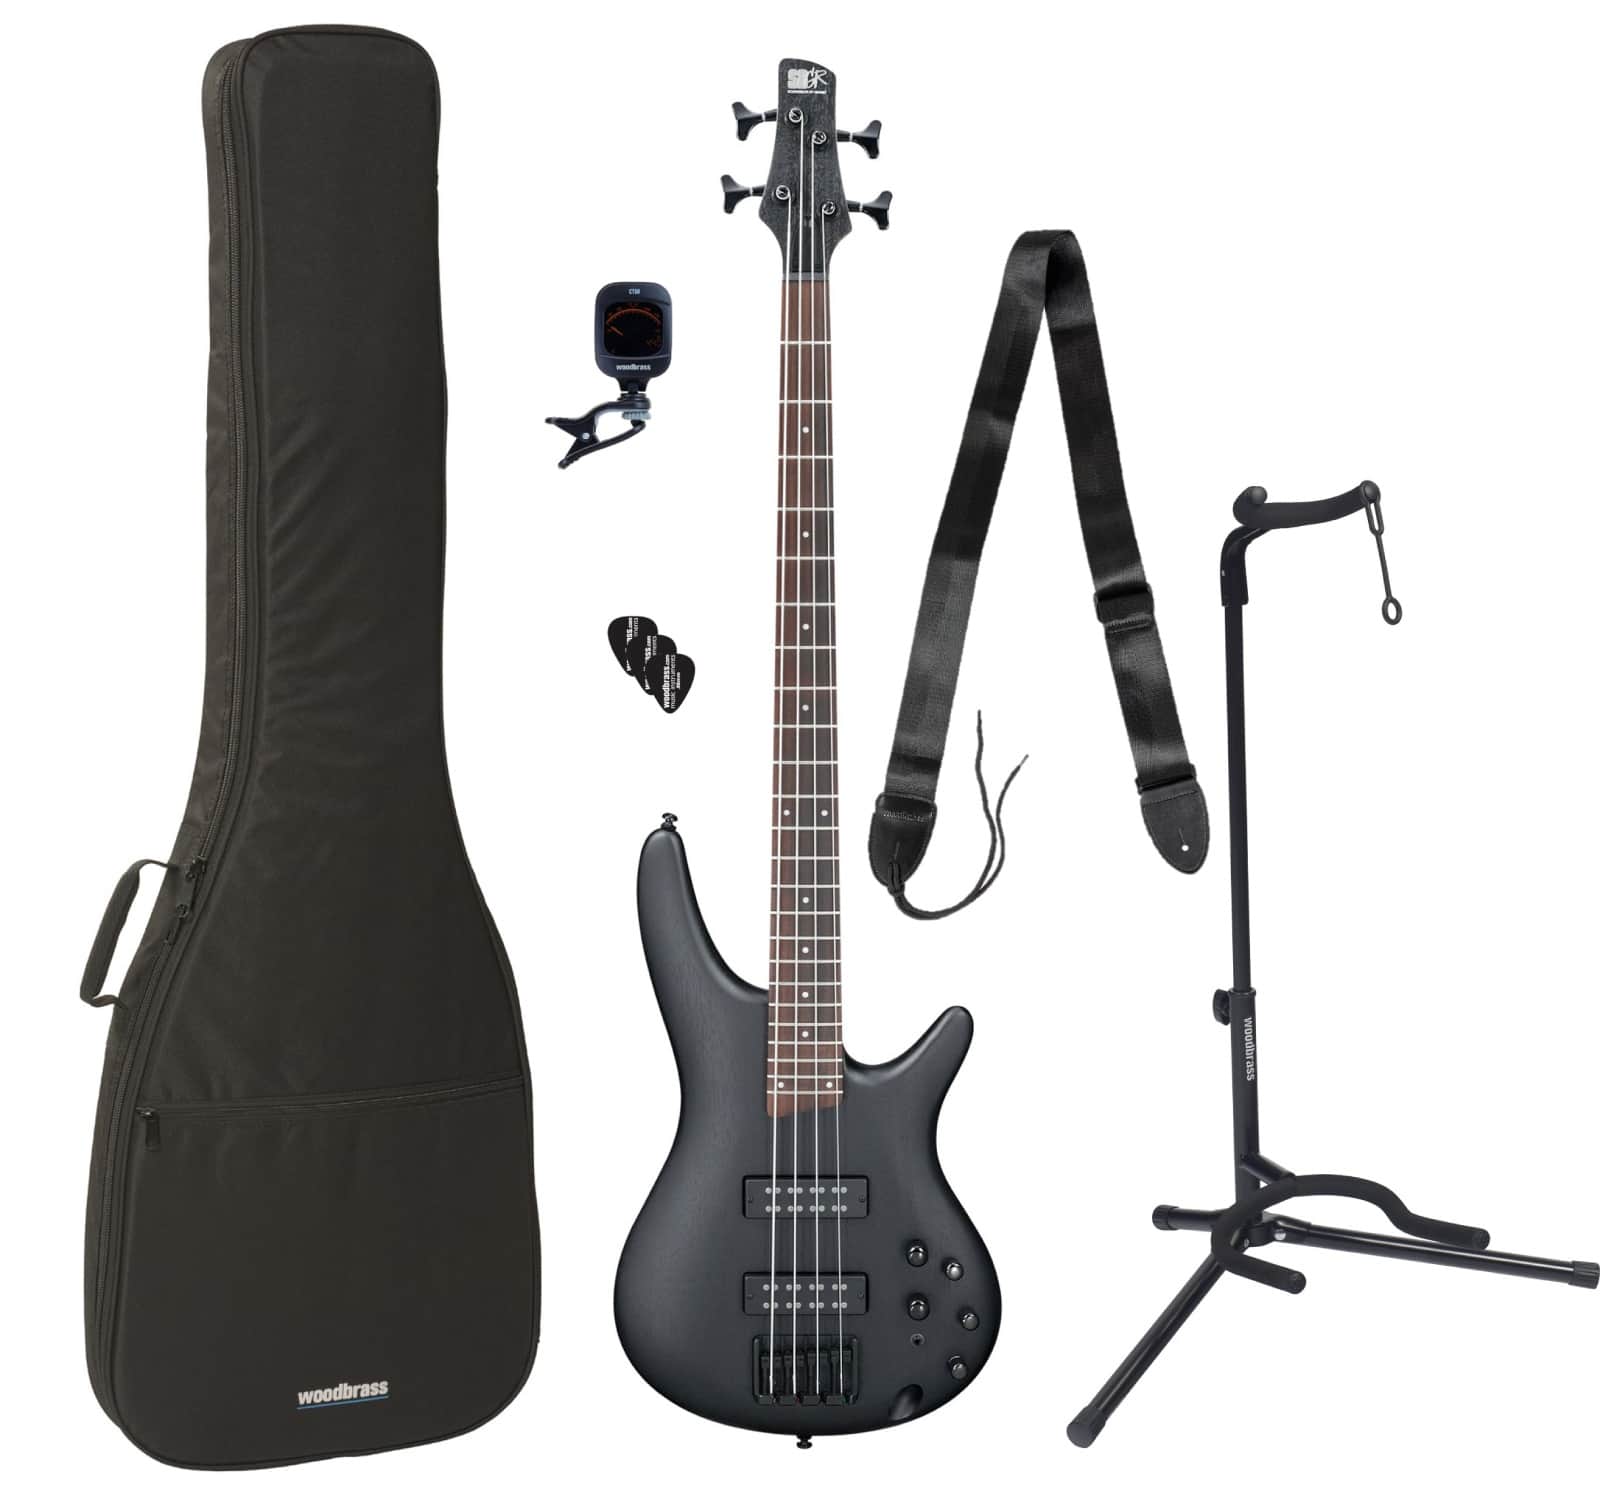 IBANEZ PACK SR300EB-WK-WEATHERED BLACK + ACCESSOIRES